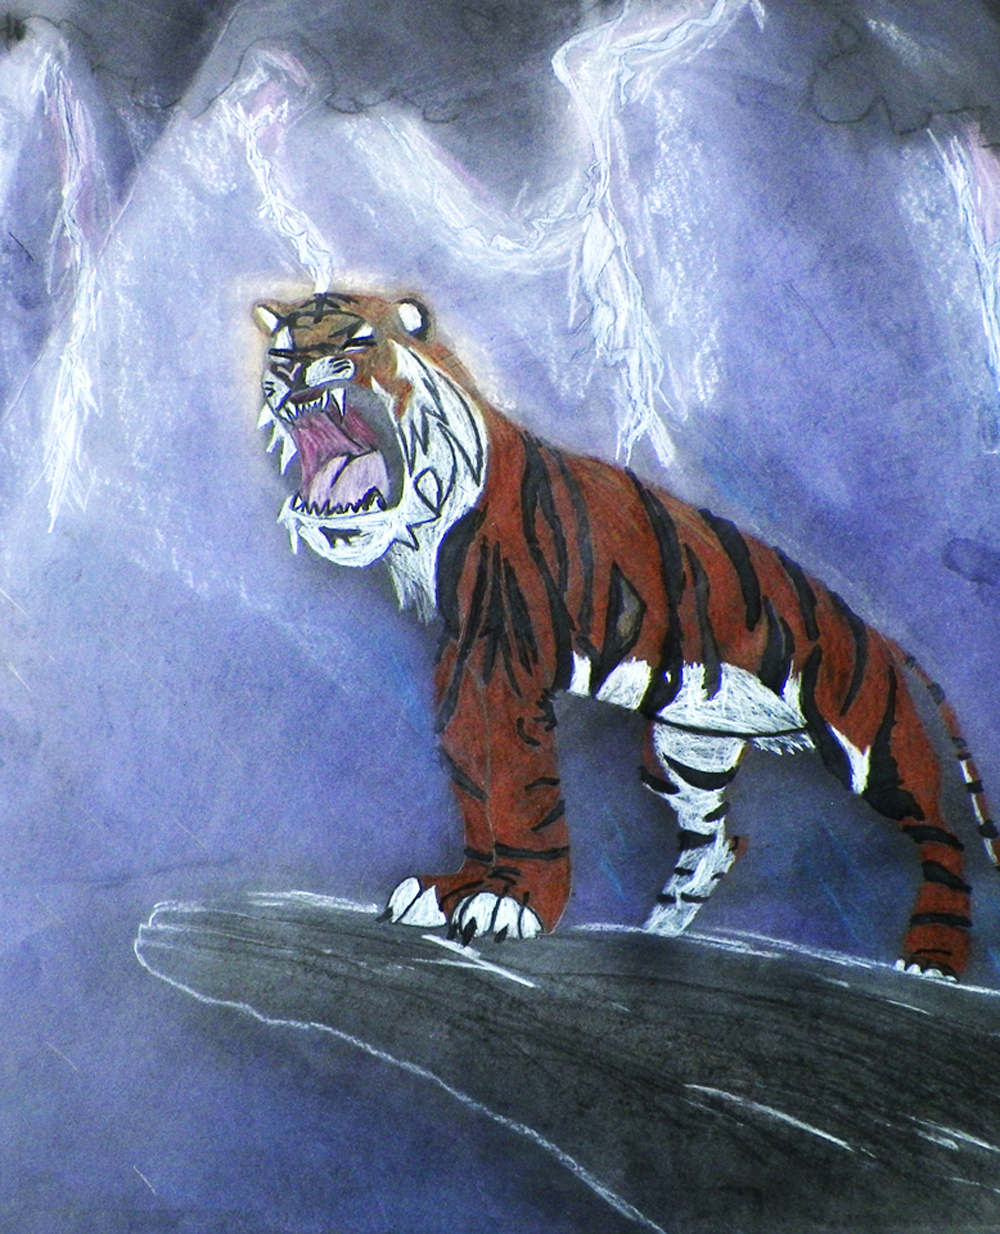 Mike the Tiger by Iamphotoshop